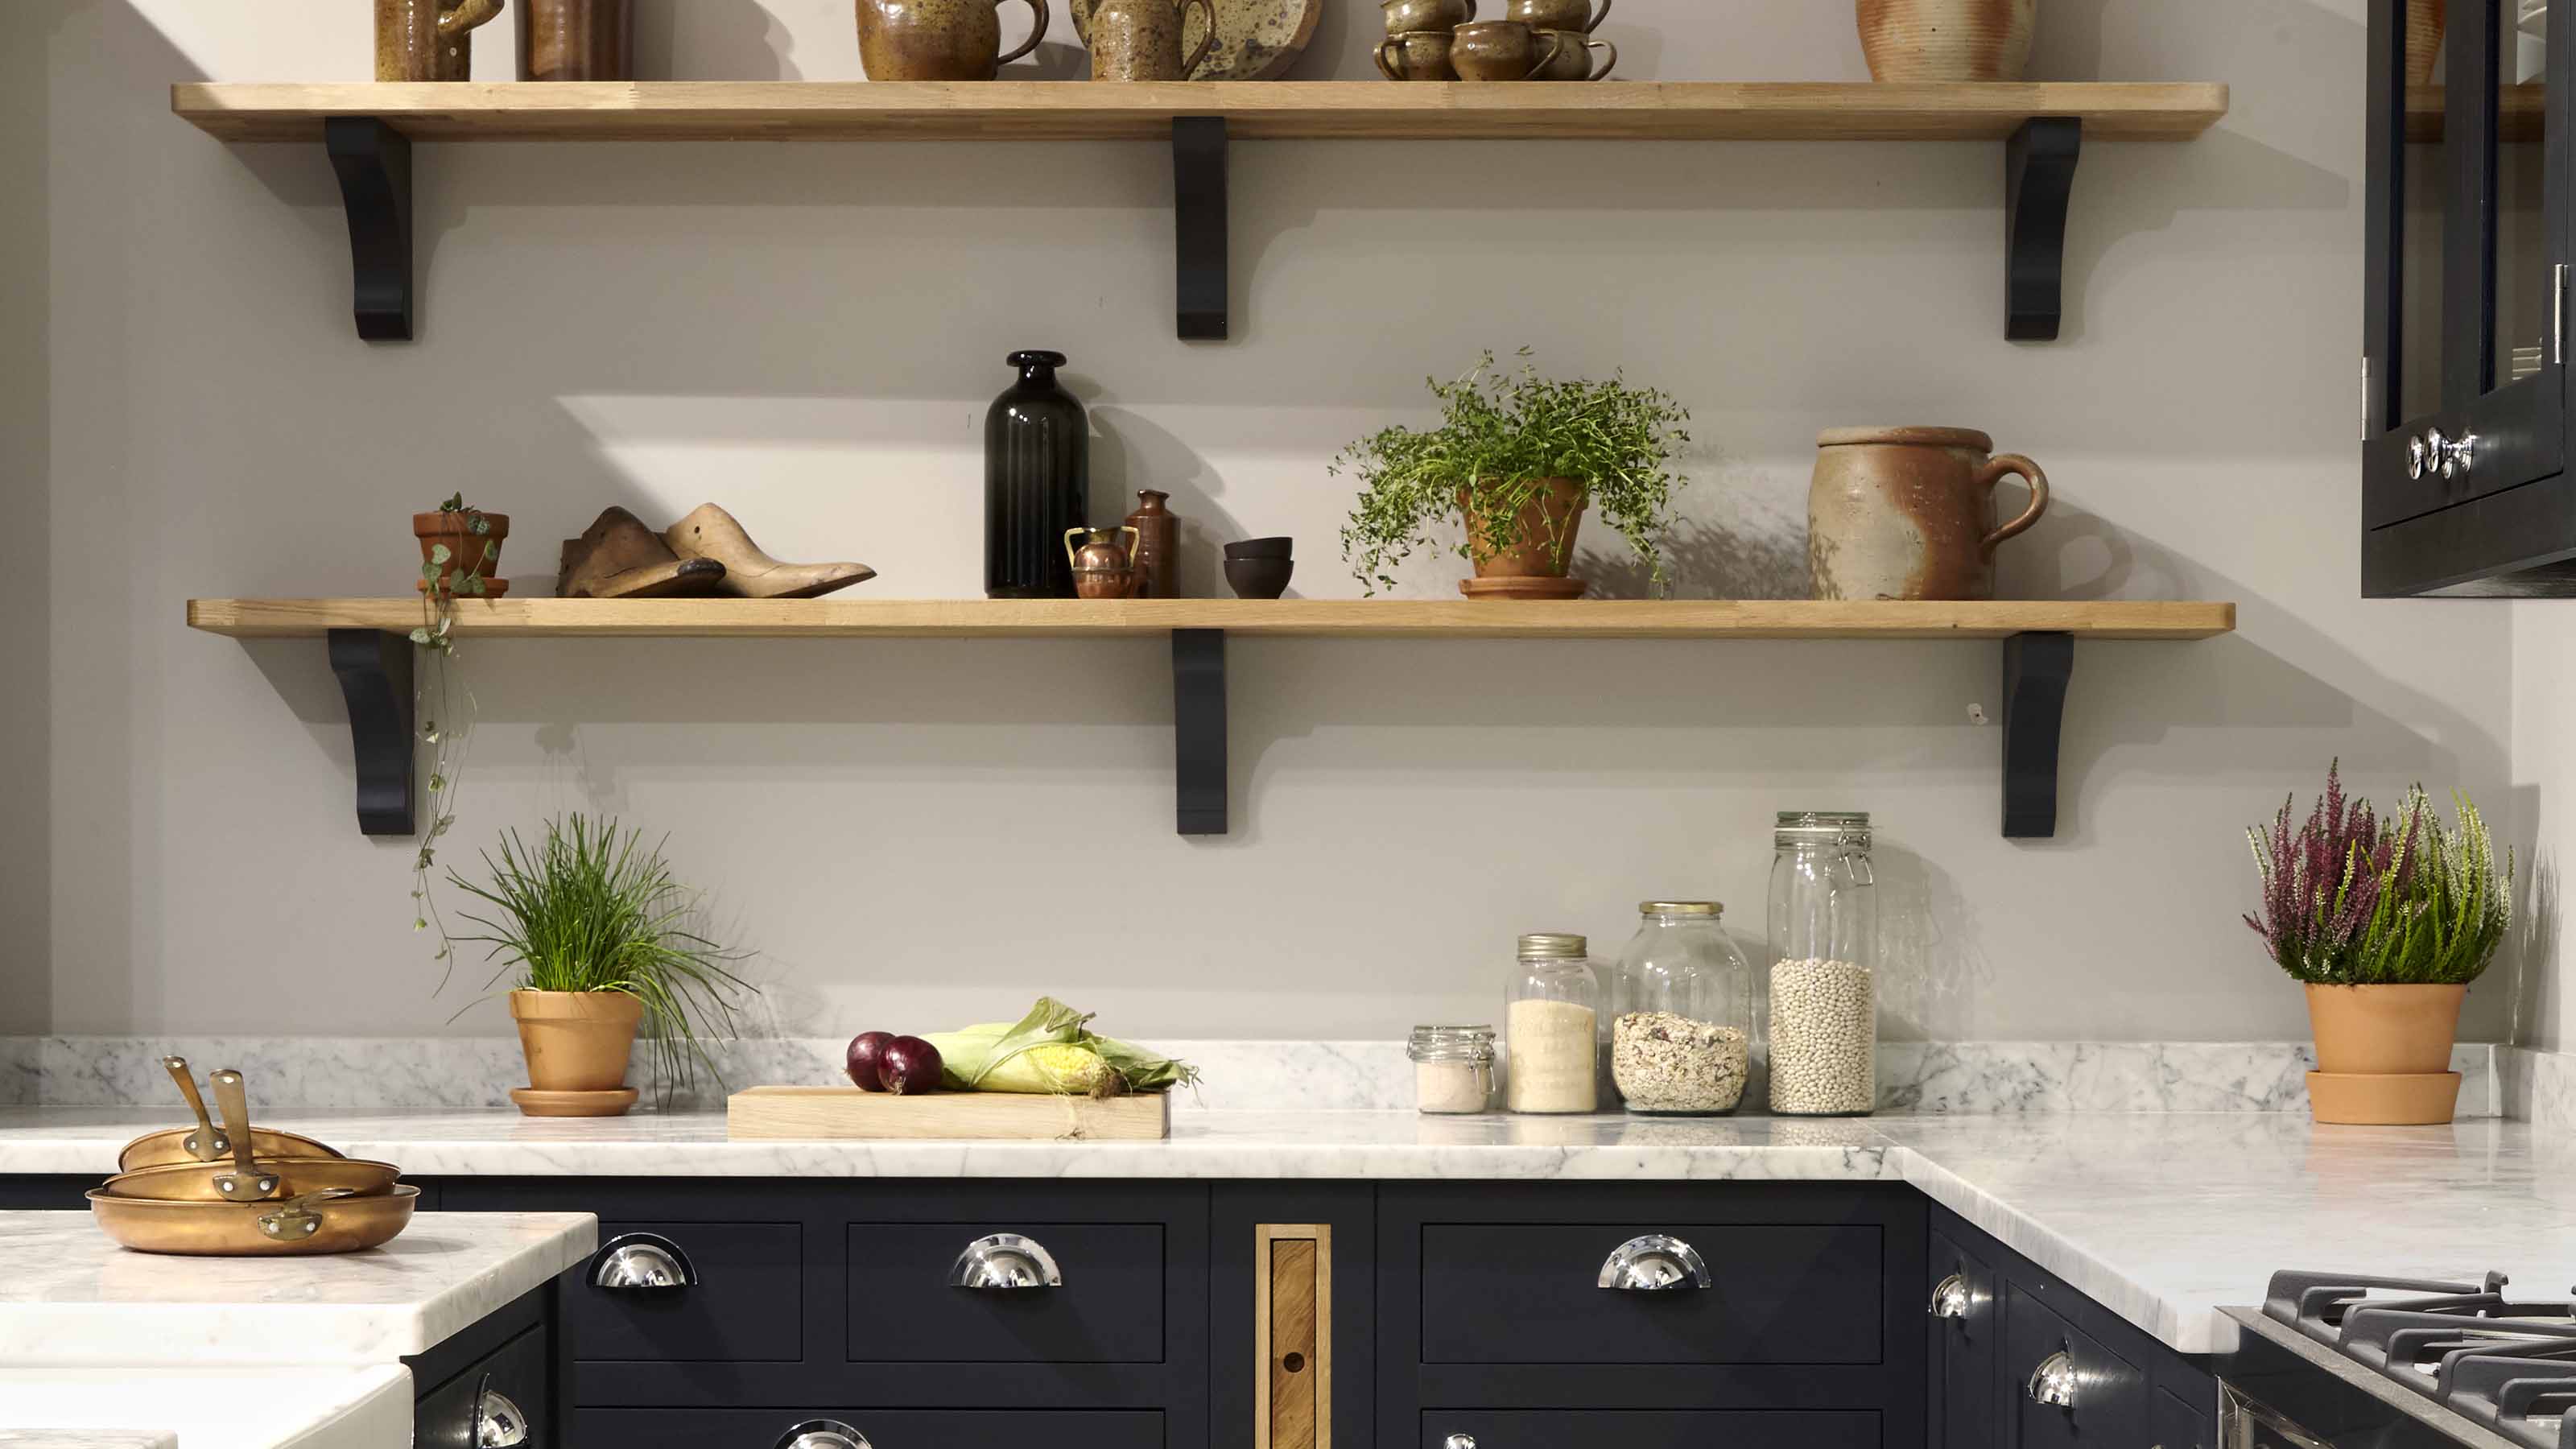 Steps for Decluttering Your Kitchen Counters